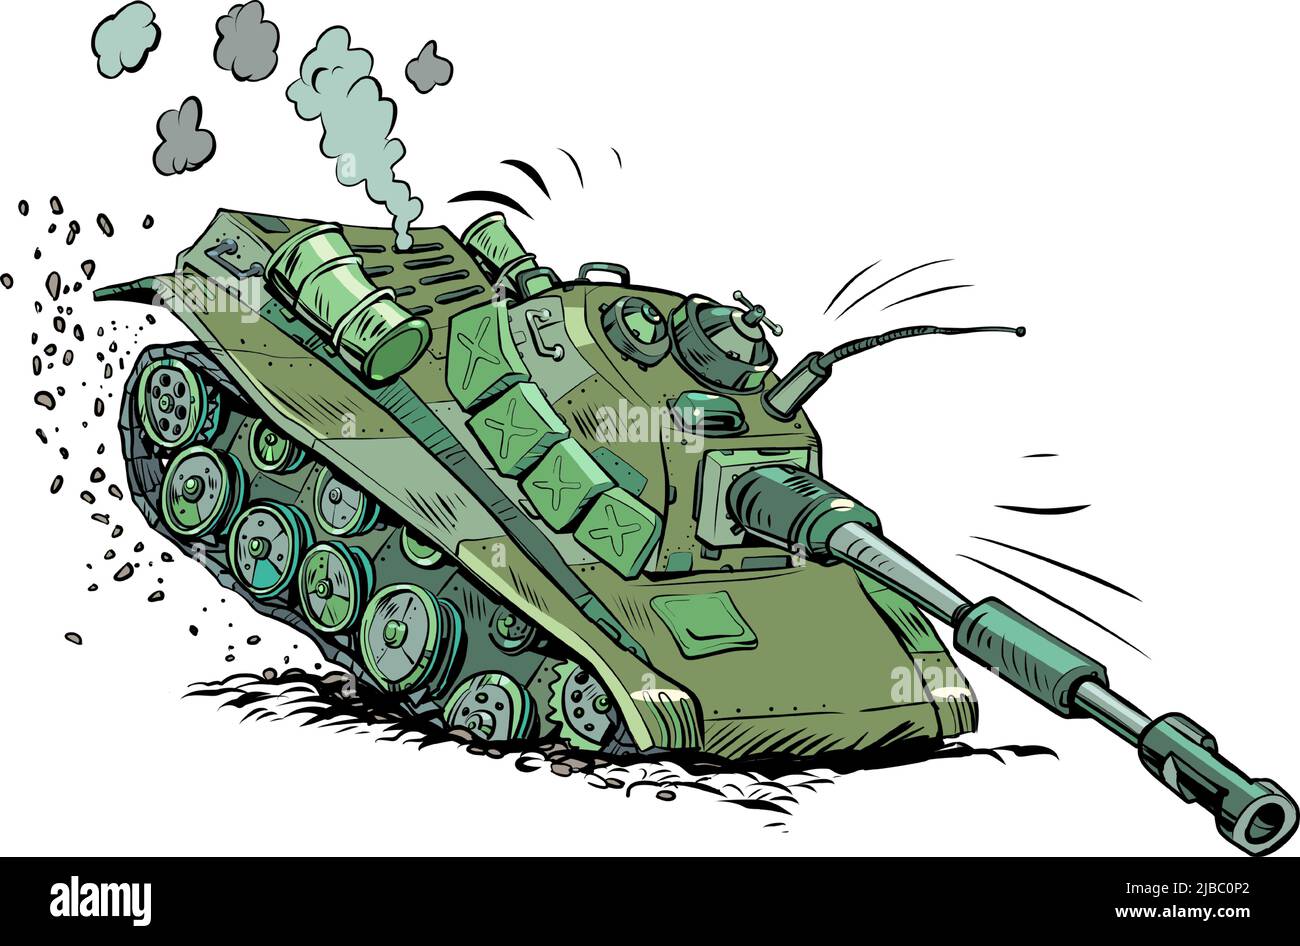 Destroyed military tank. Against military aggression and dictatorship. Invasion and attack Stock Vector